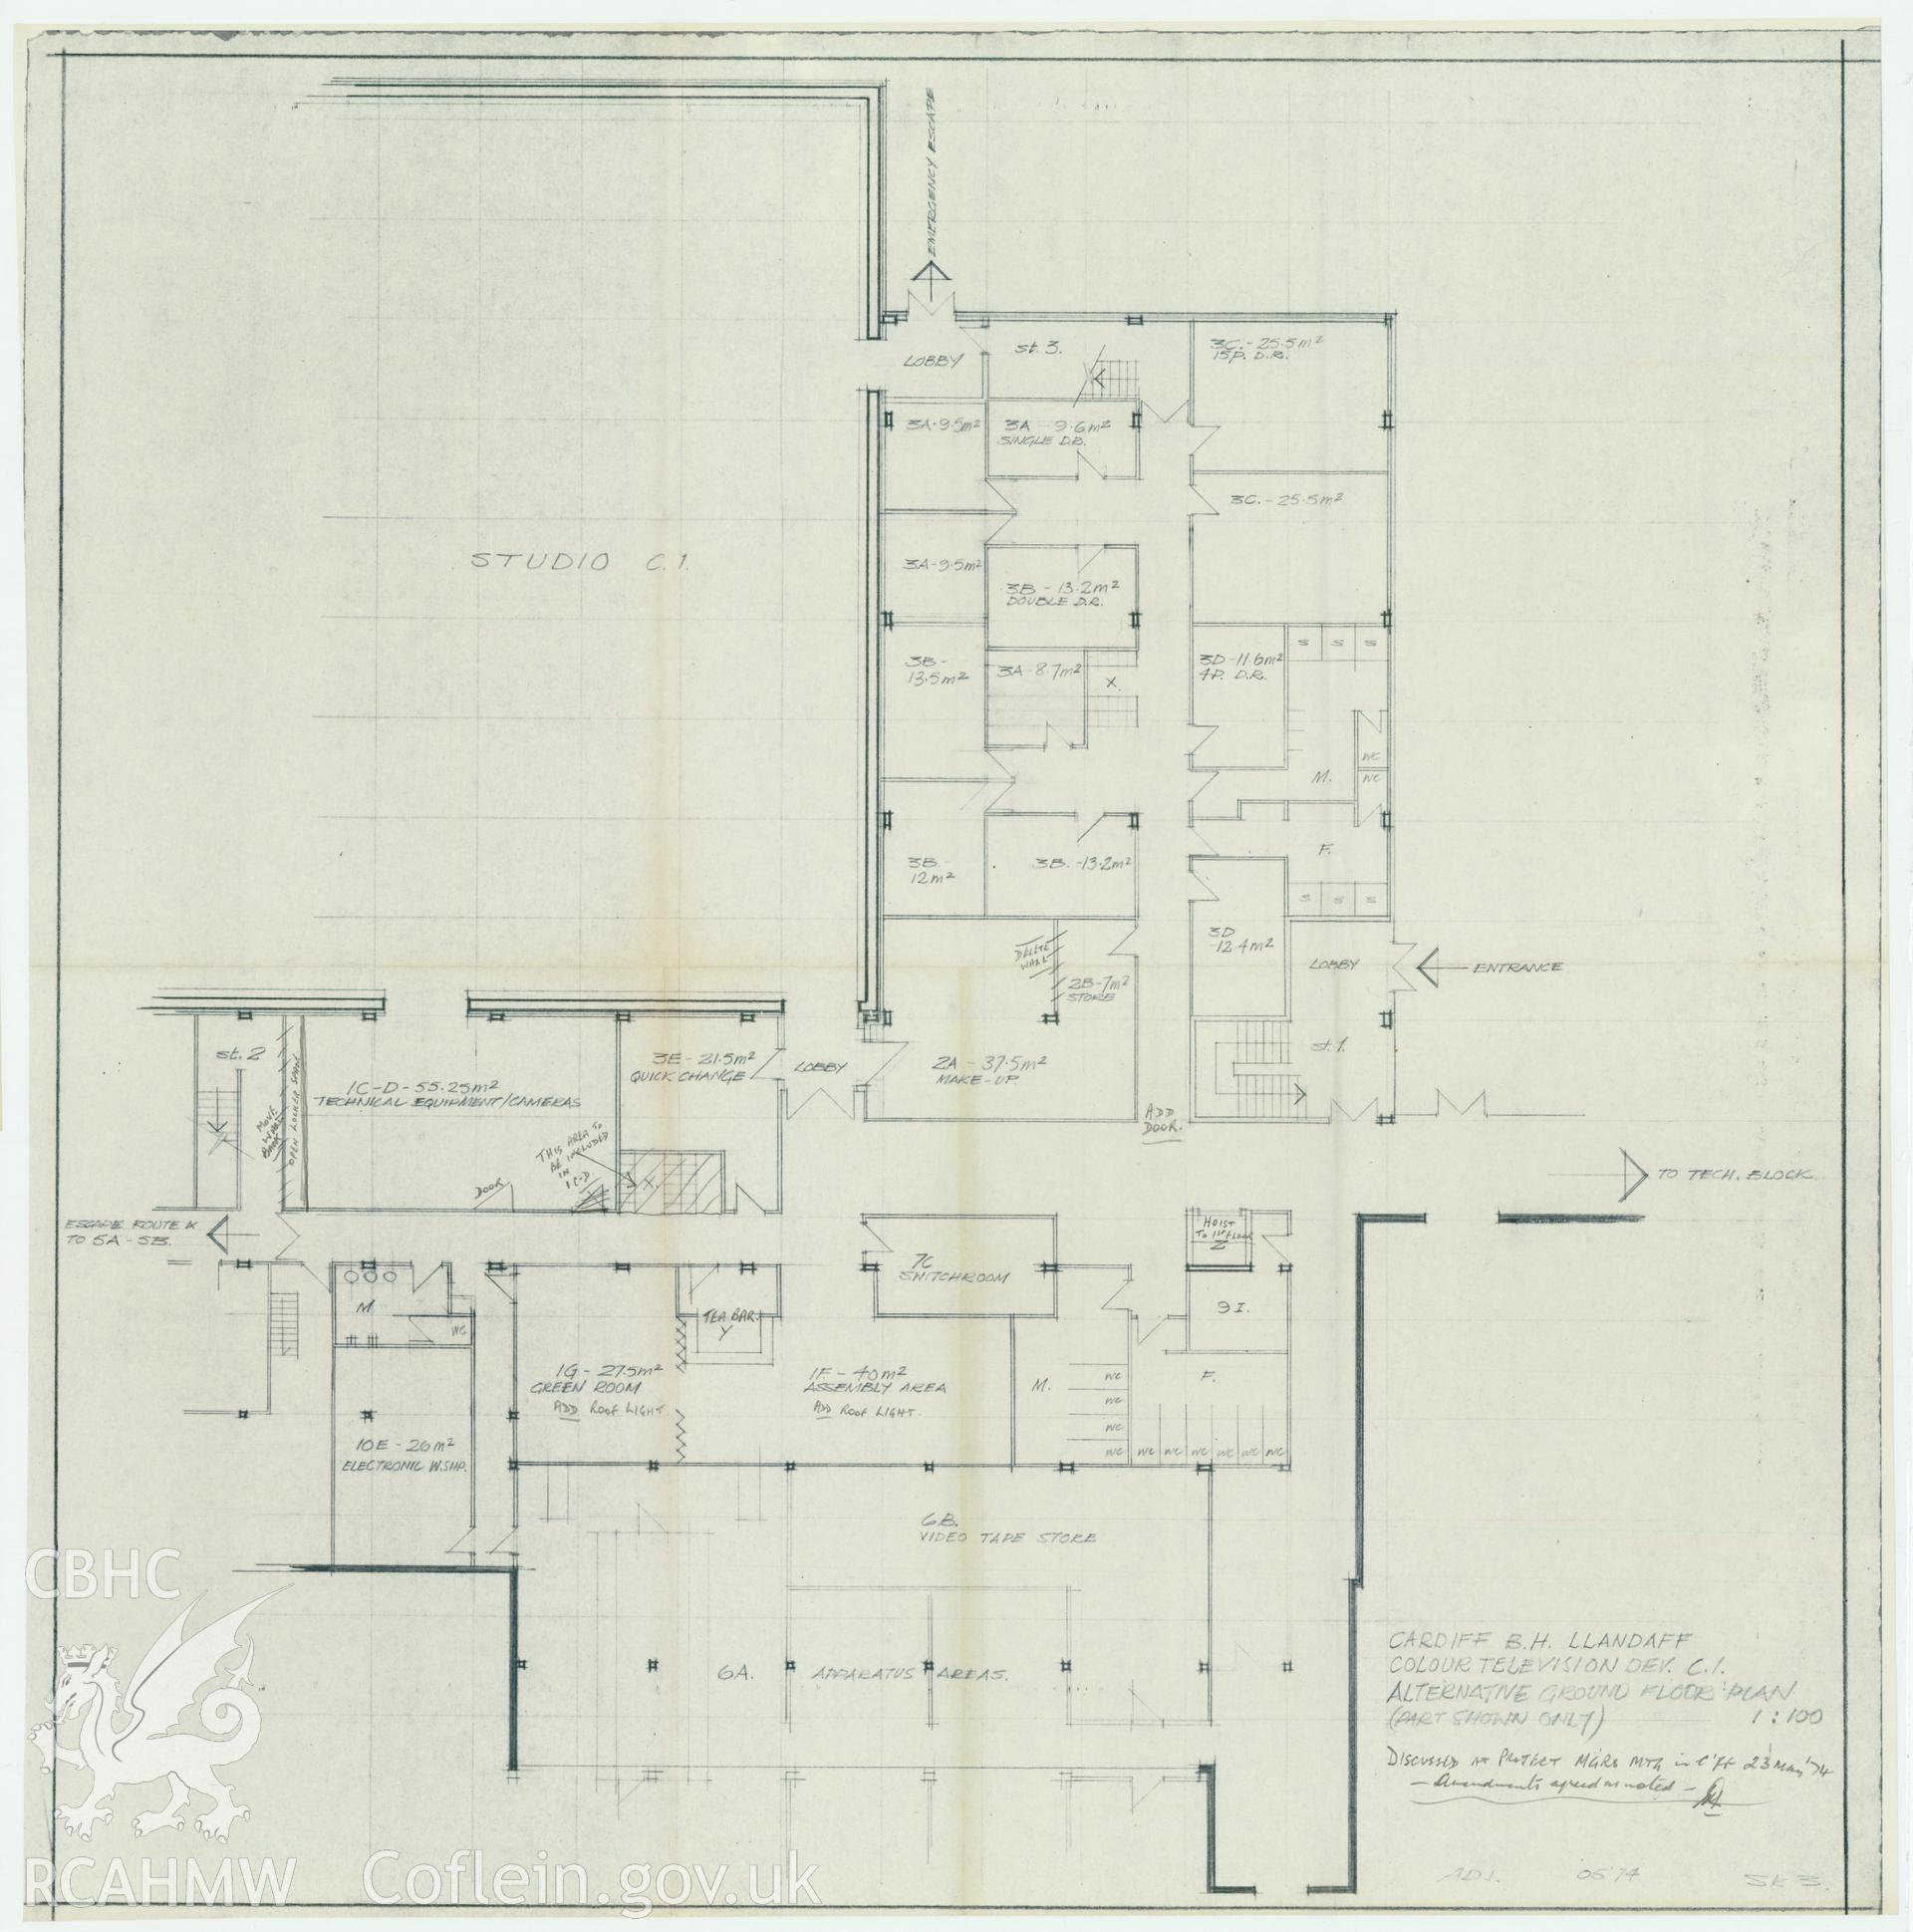 Digitised drawing plan of Llandaff production studio C1 Colour TV Development - alternative drawing of the ground floor plan of the west wing ancillary unit. Drawing no. SK3. May 1974.